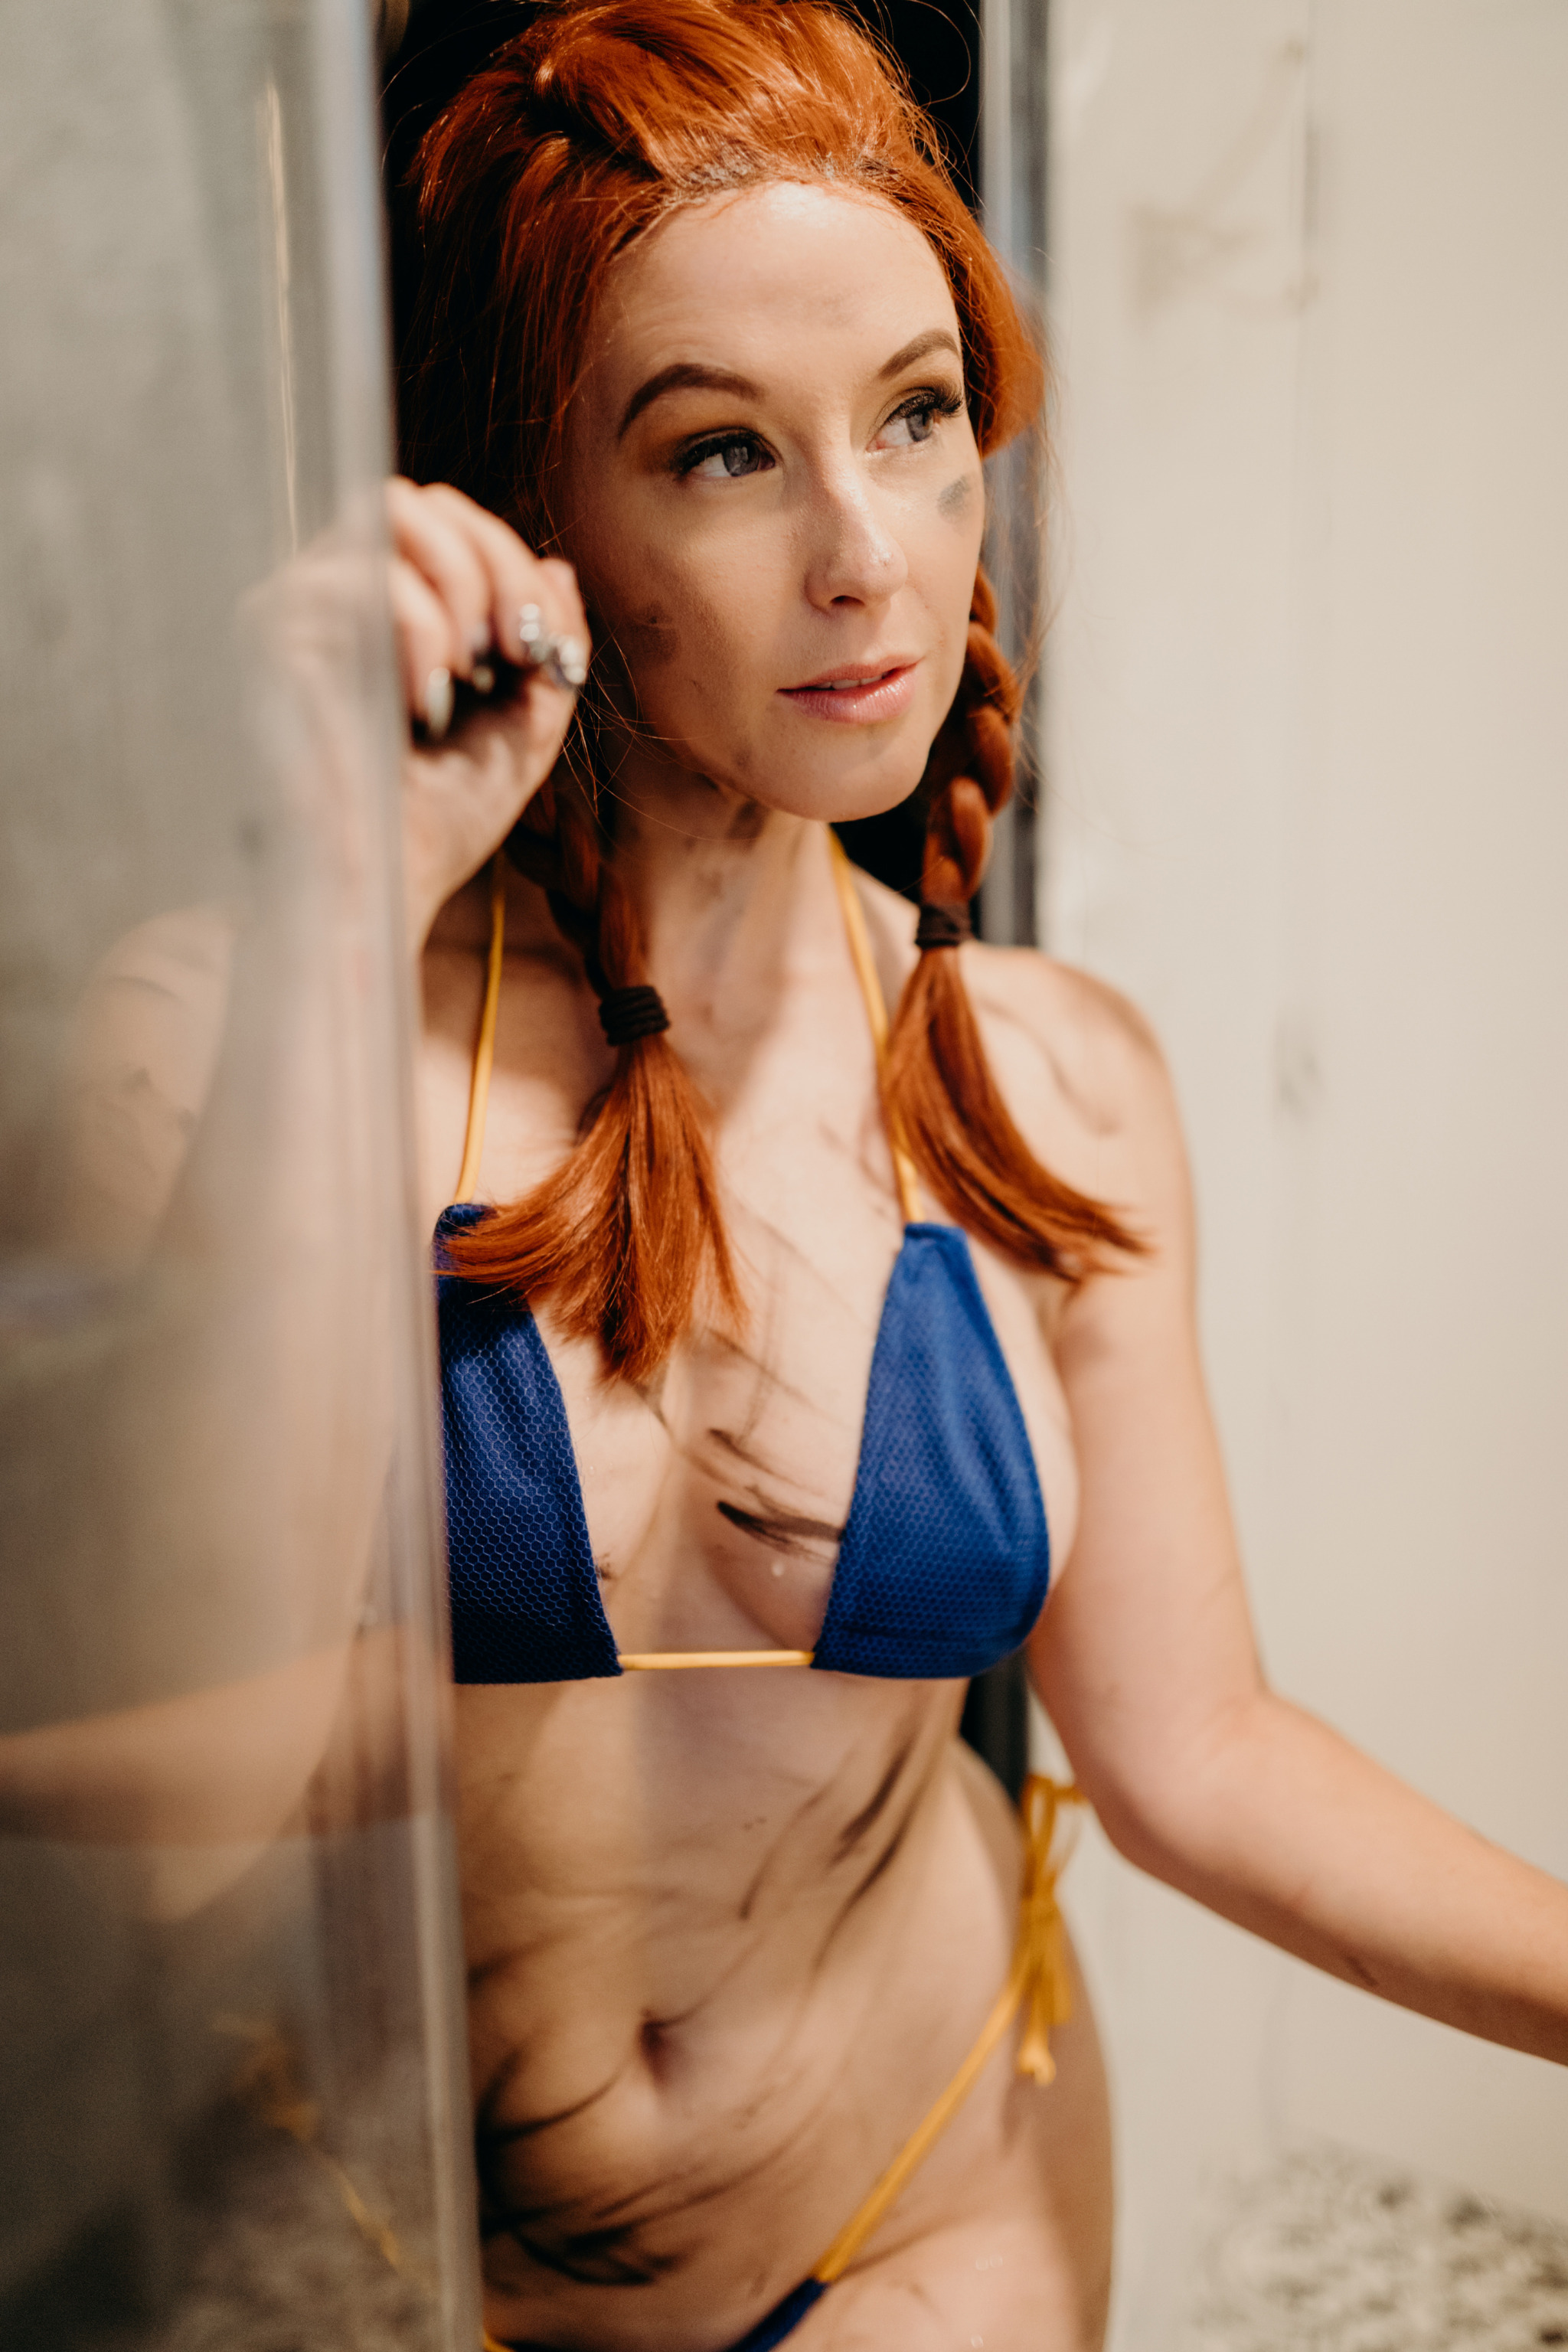 :Shower time with Meg Turney porn pictures